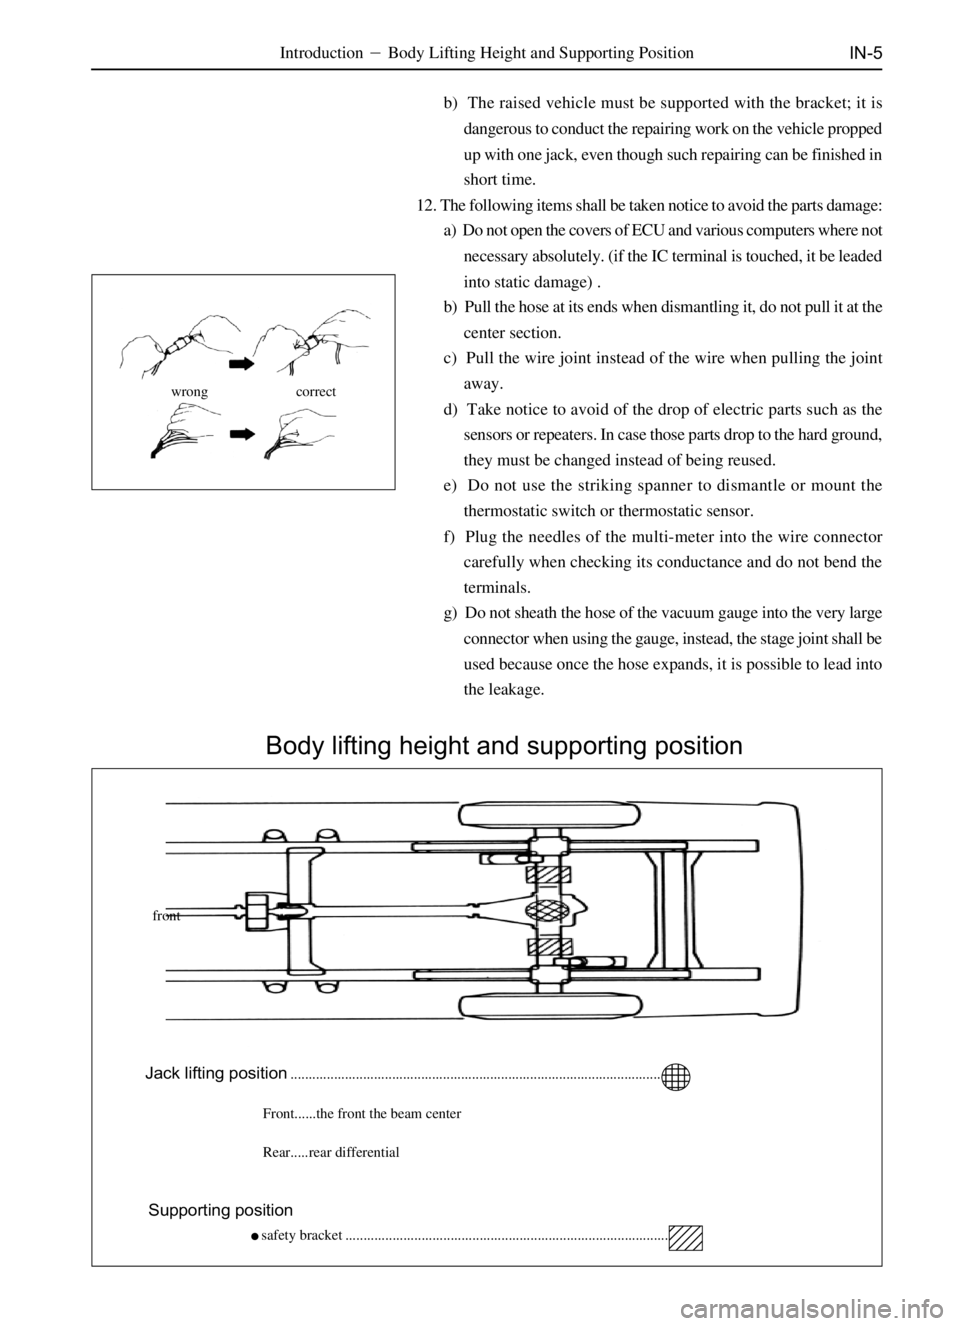 GREAT WALL SAFE 2006  Service Manual IN-5
     Body lifting height and supporting position
wrong correct
IntroductionBody Lifting Height and Supporting Position
Jack lifting position
.....................................................